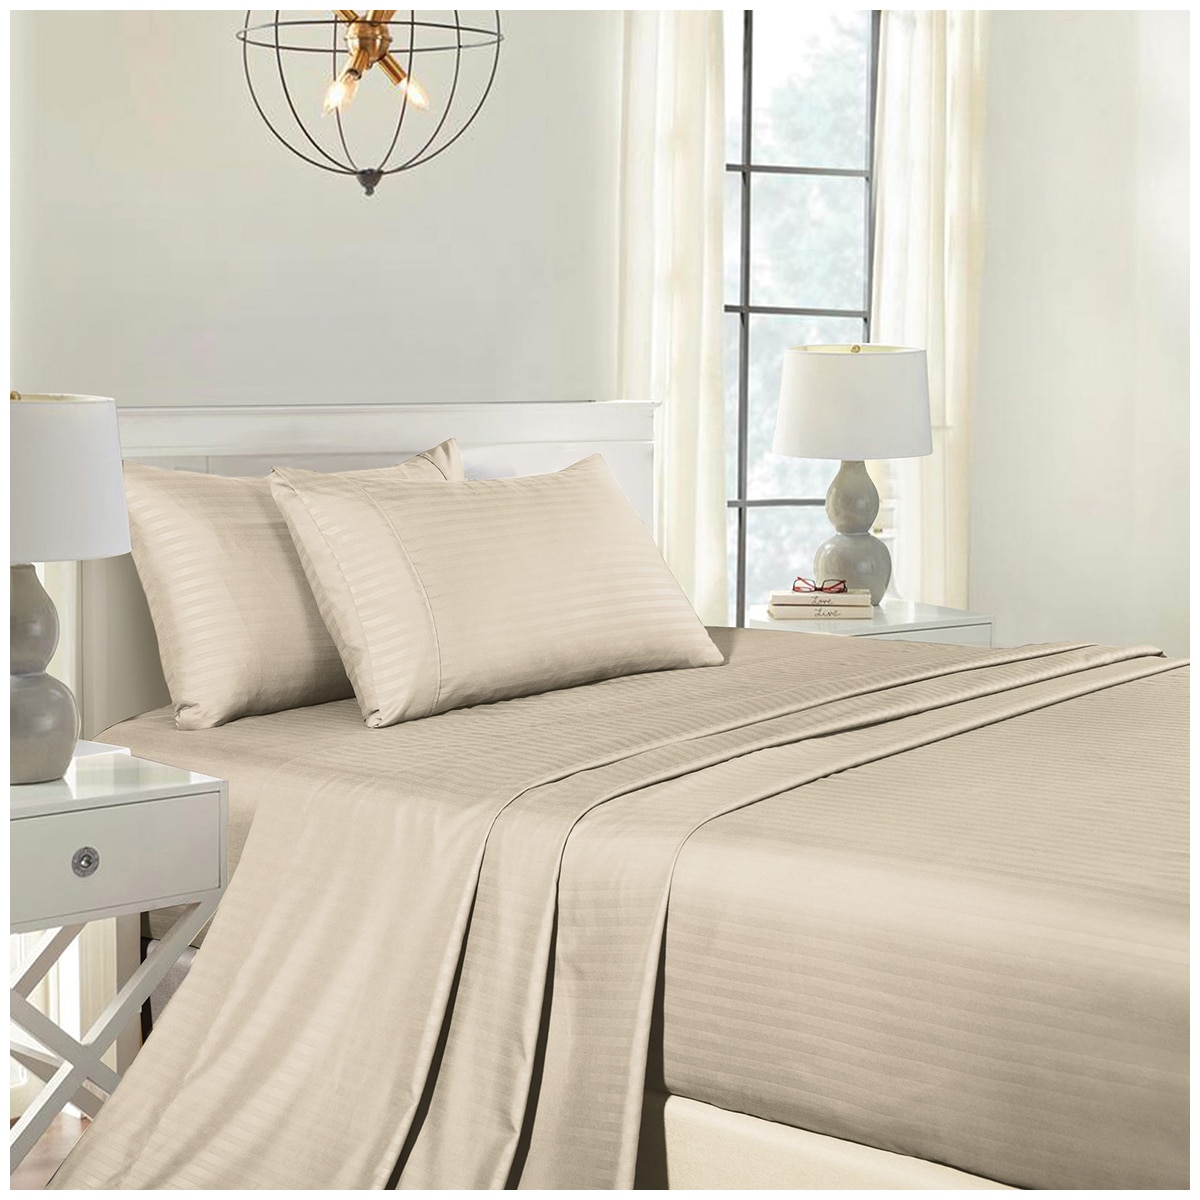 Bdirect Royal Comfort Blended Bamboo Sheet Set with stripes Double - Sand